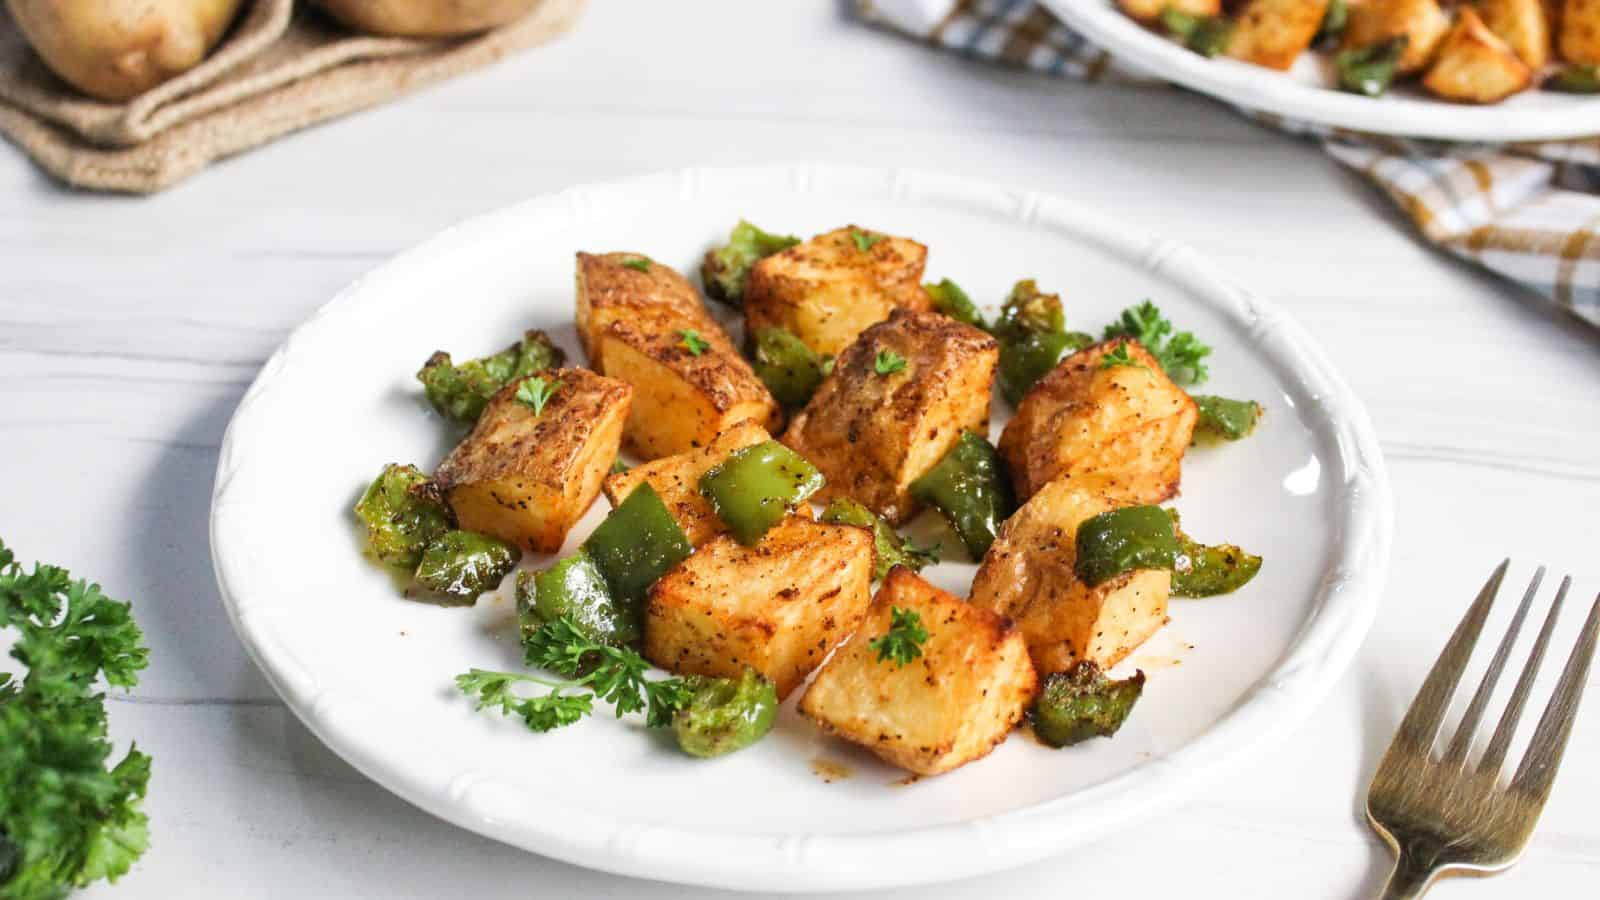 Air-fried potato cubes with diced green bell peppers on plate.